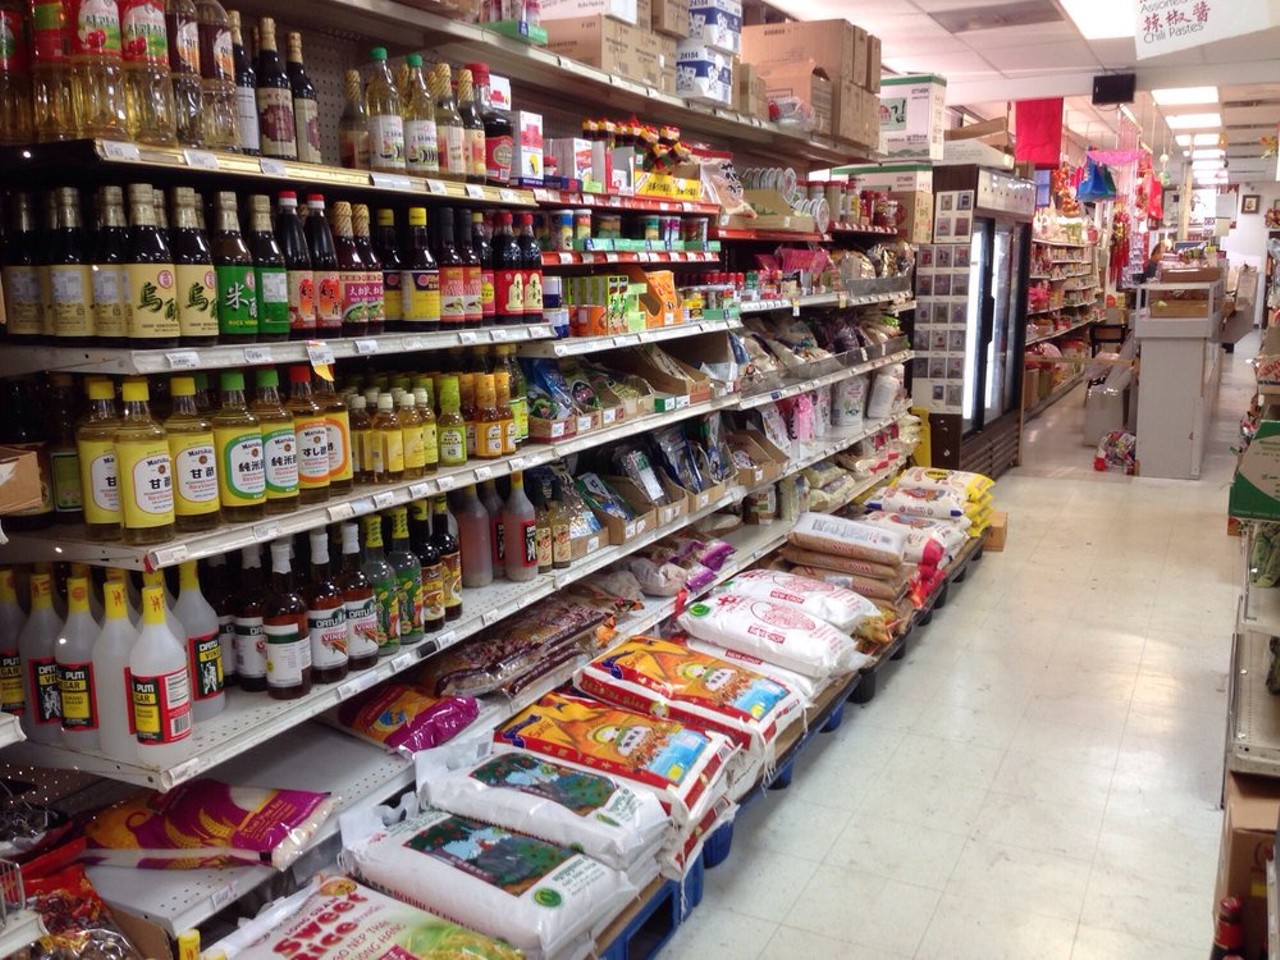 Tim's Oriental and Seafood Market
7015 Bandera Rd Ste 8,  (210) 523-1688, Mon.-Sat.:10am-9pm, Sun.:10am-8pm
Stocked with frozen entrees, tons of sake, a plethora of noodles and snacks, Tim's has stuffed aisles full of Asian favorites. Don't miss out on their selection of veggies, seafood, pork belly and roasted duck, for which Tim's is especially renowned.
Yelp/Tim's Oriental and Seafood Market